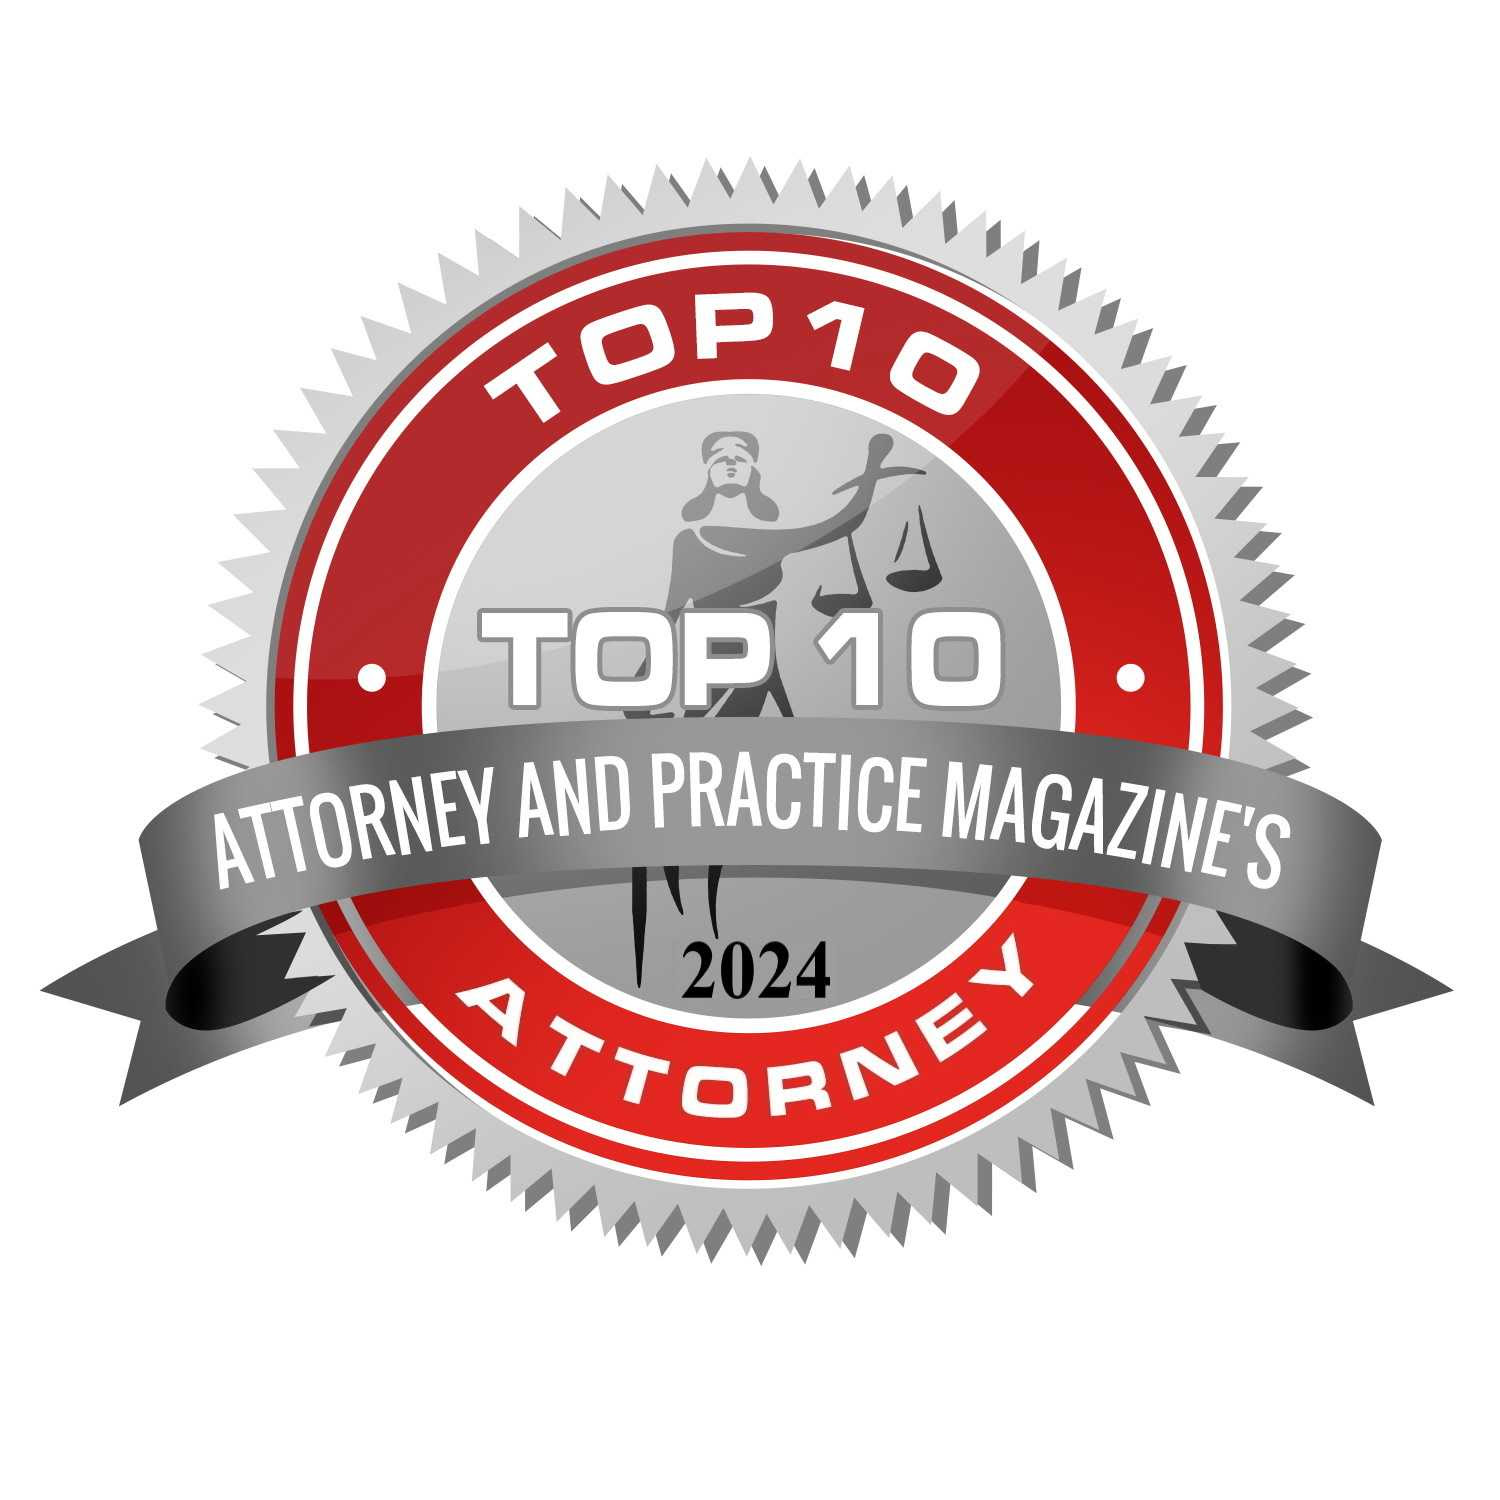 Attorney and Practice Magazine <span class='block'>Top 10 Personal Injury Attorney Award</span>